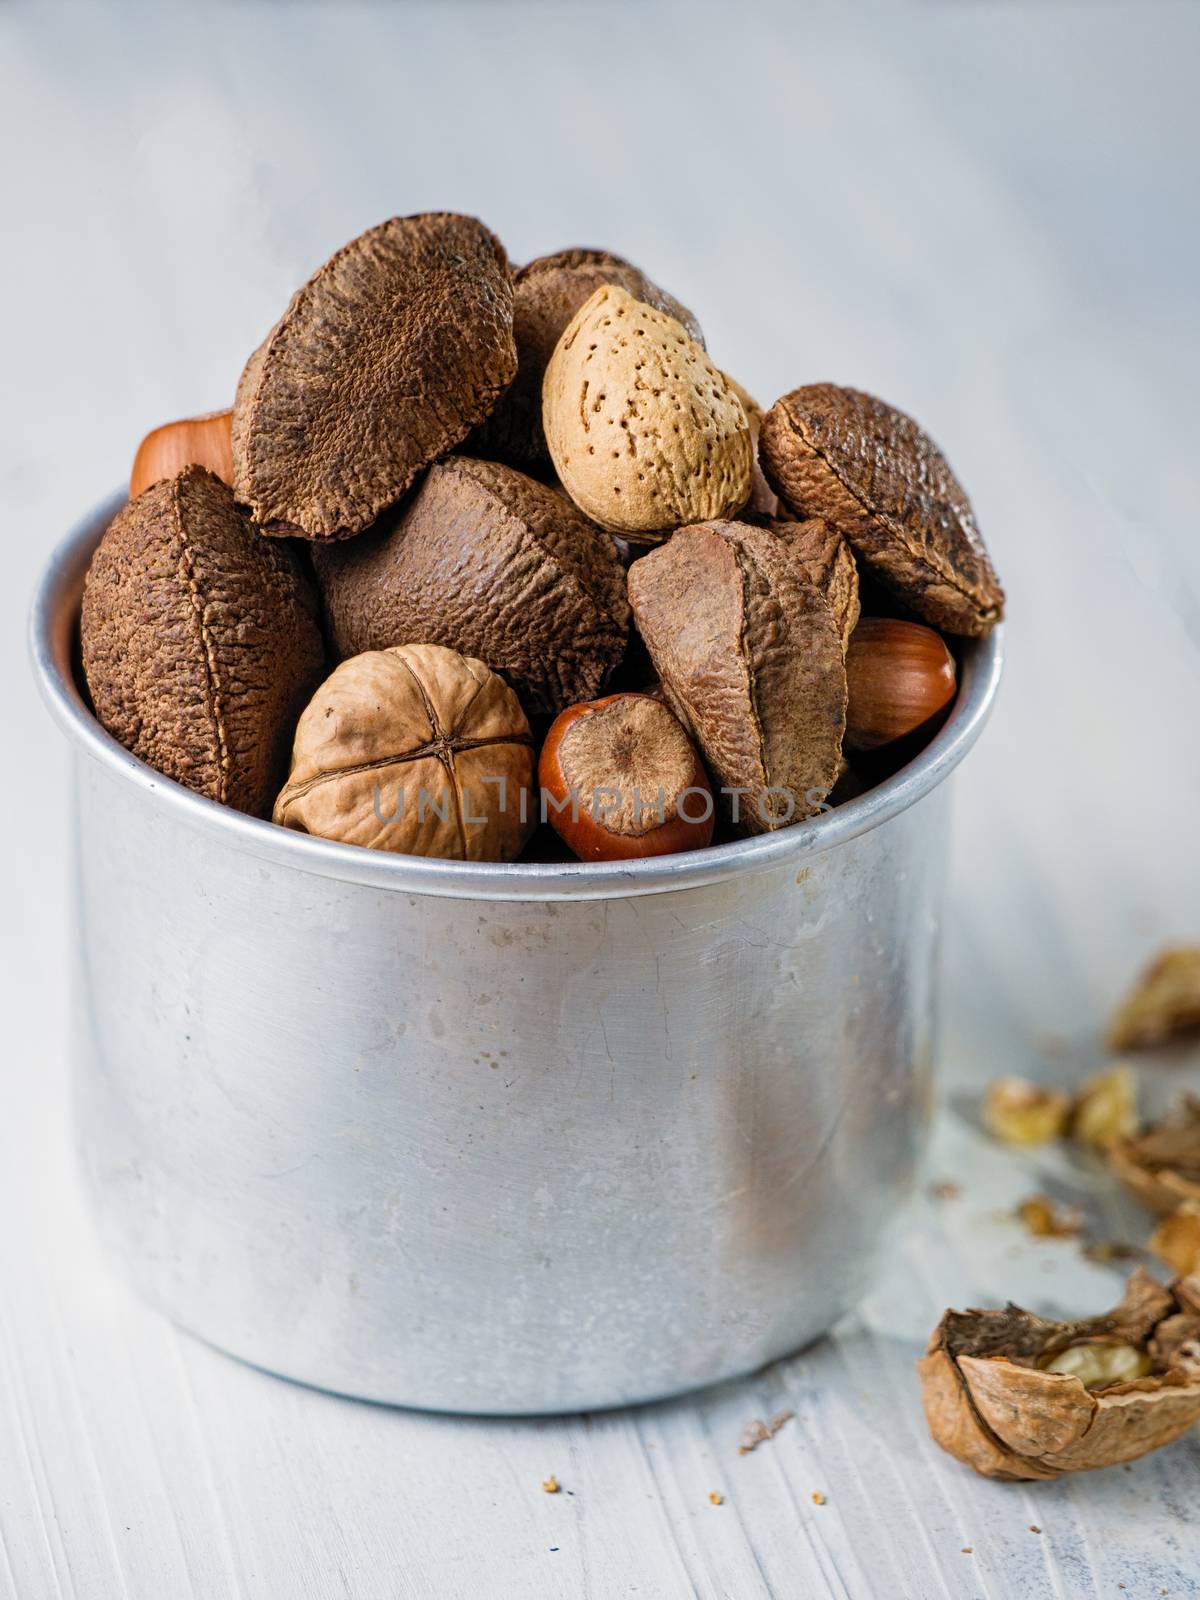 assorted mixed nuts snack by zkruger